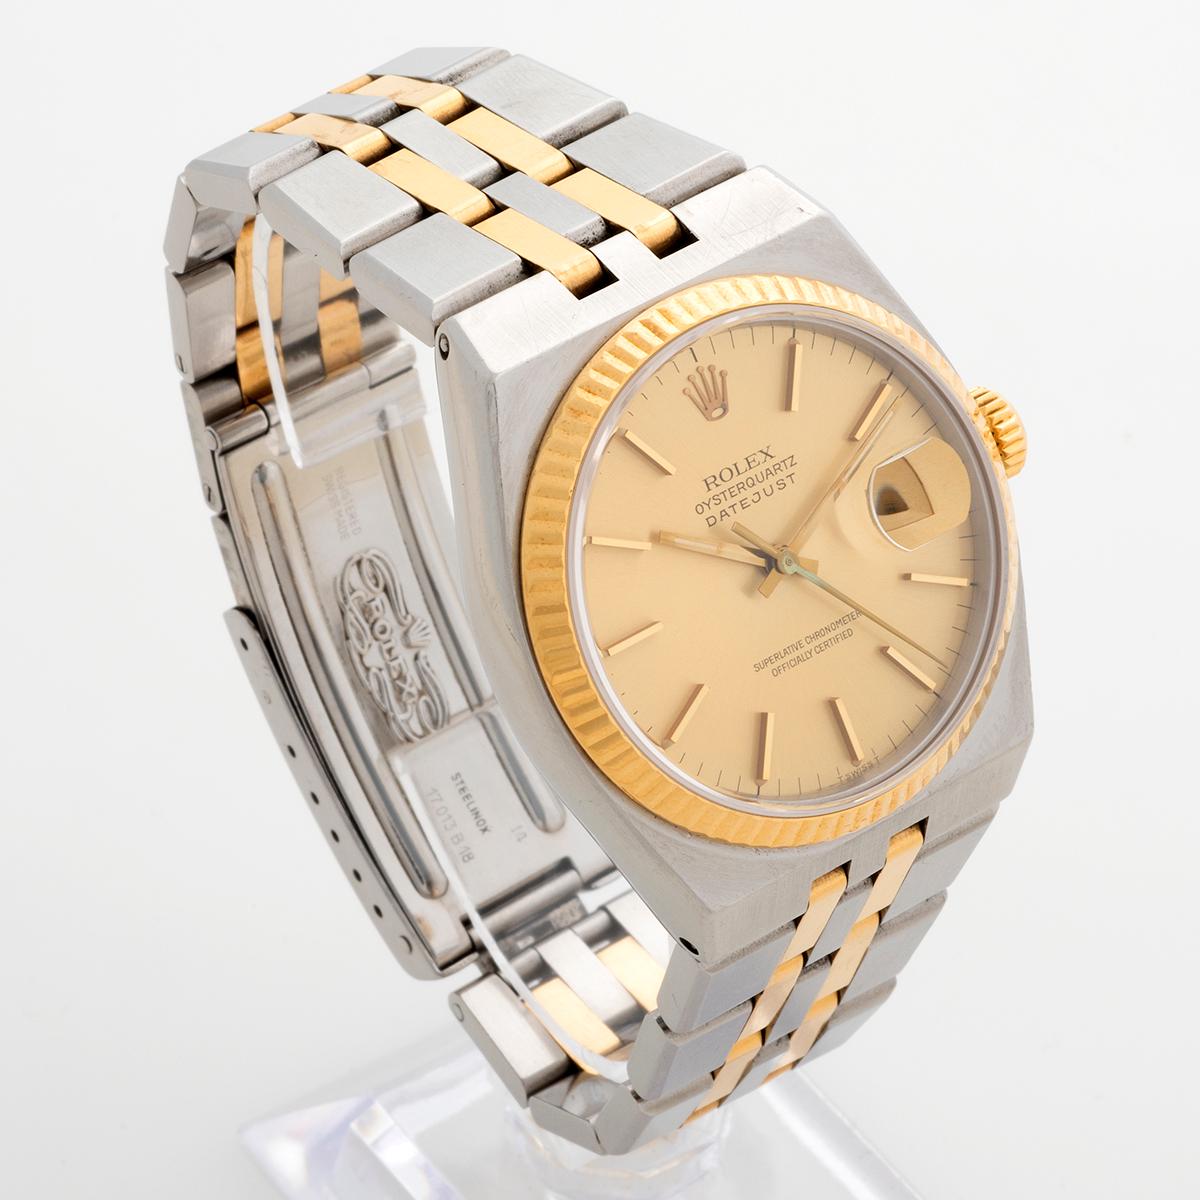 Our Rolex Datejust Oysterquartz features the classic 18k yellow gold case and bracelet with original champagne dial with original patinated hands. Presented in unpolished condition with signs of use overall, the bracelet is however strong and with